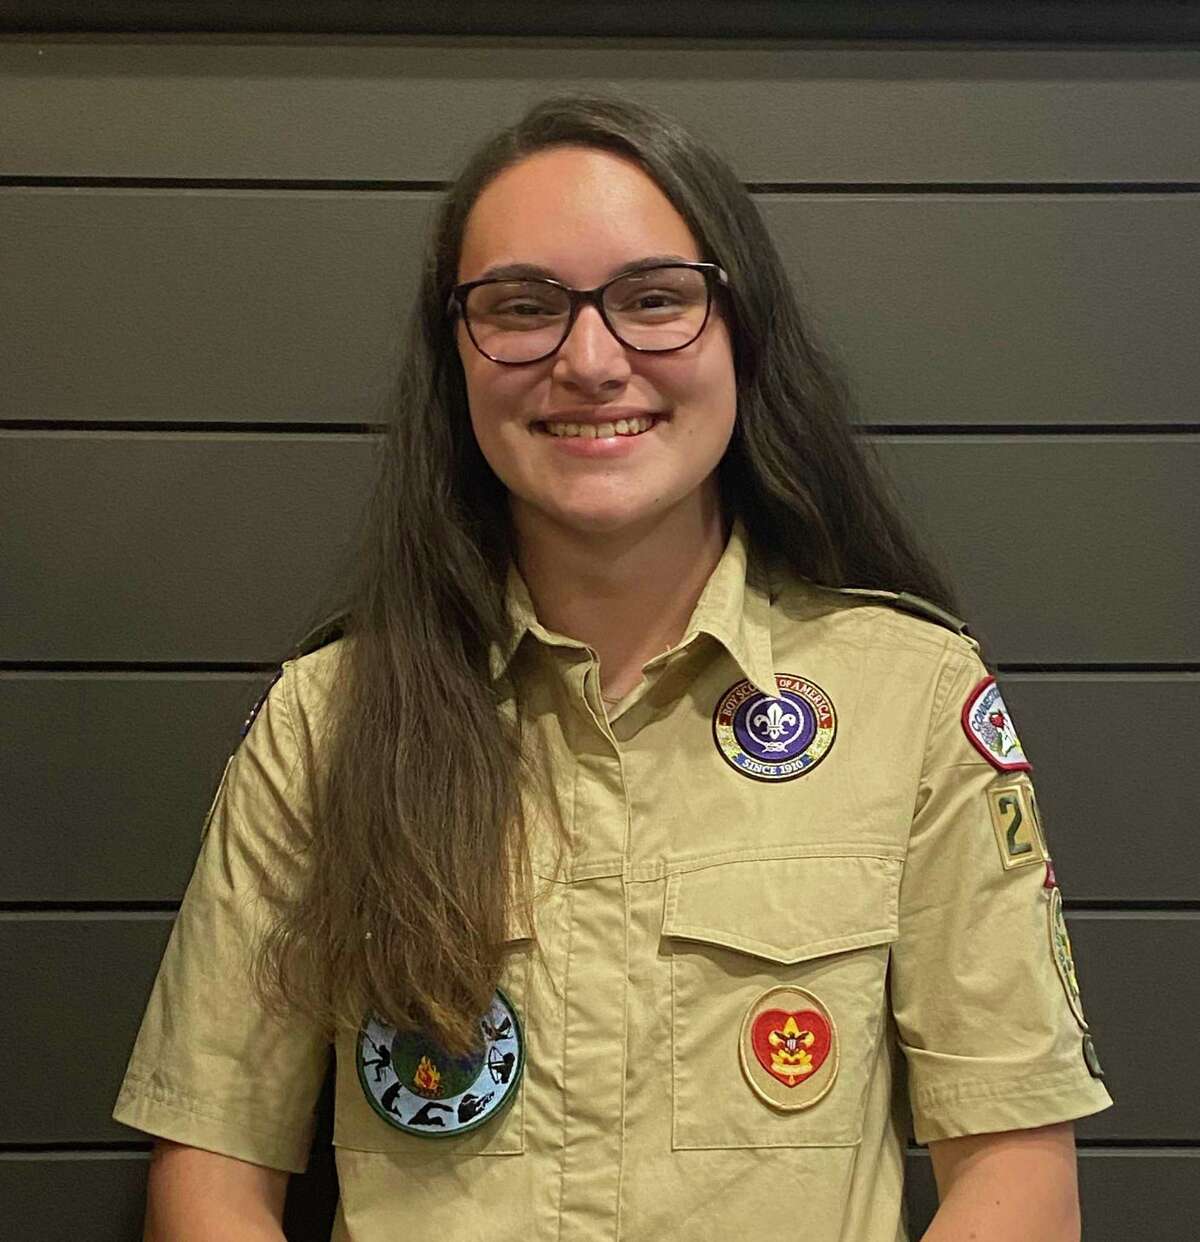 Olivia Boyan, pictured, and other members of a Boy Scouts of America troop made up of young women recently completed an Eagle Scout project at Stanclift Cove.